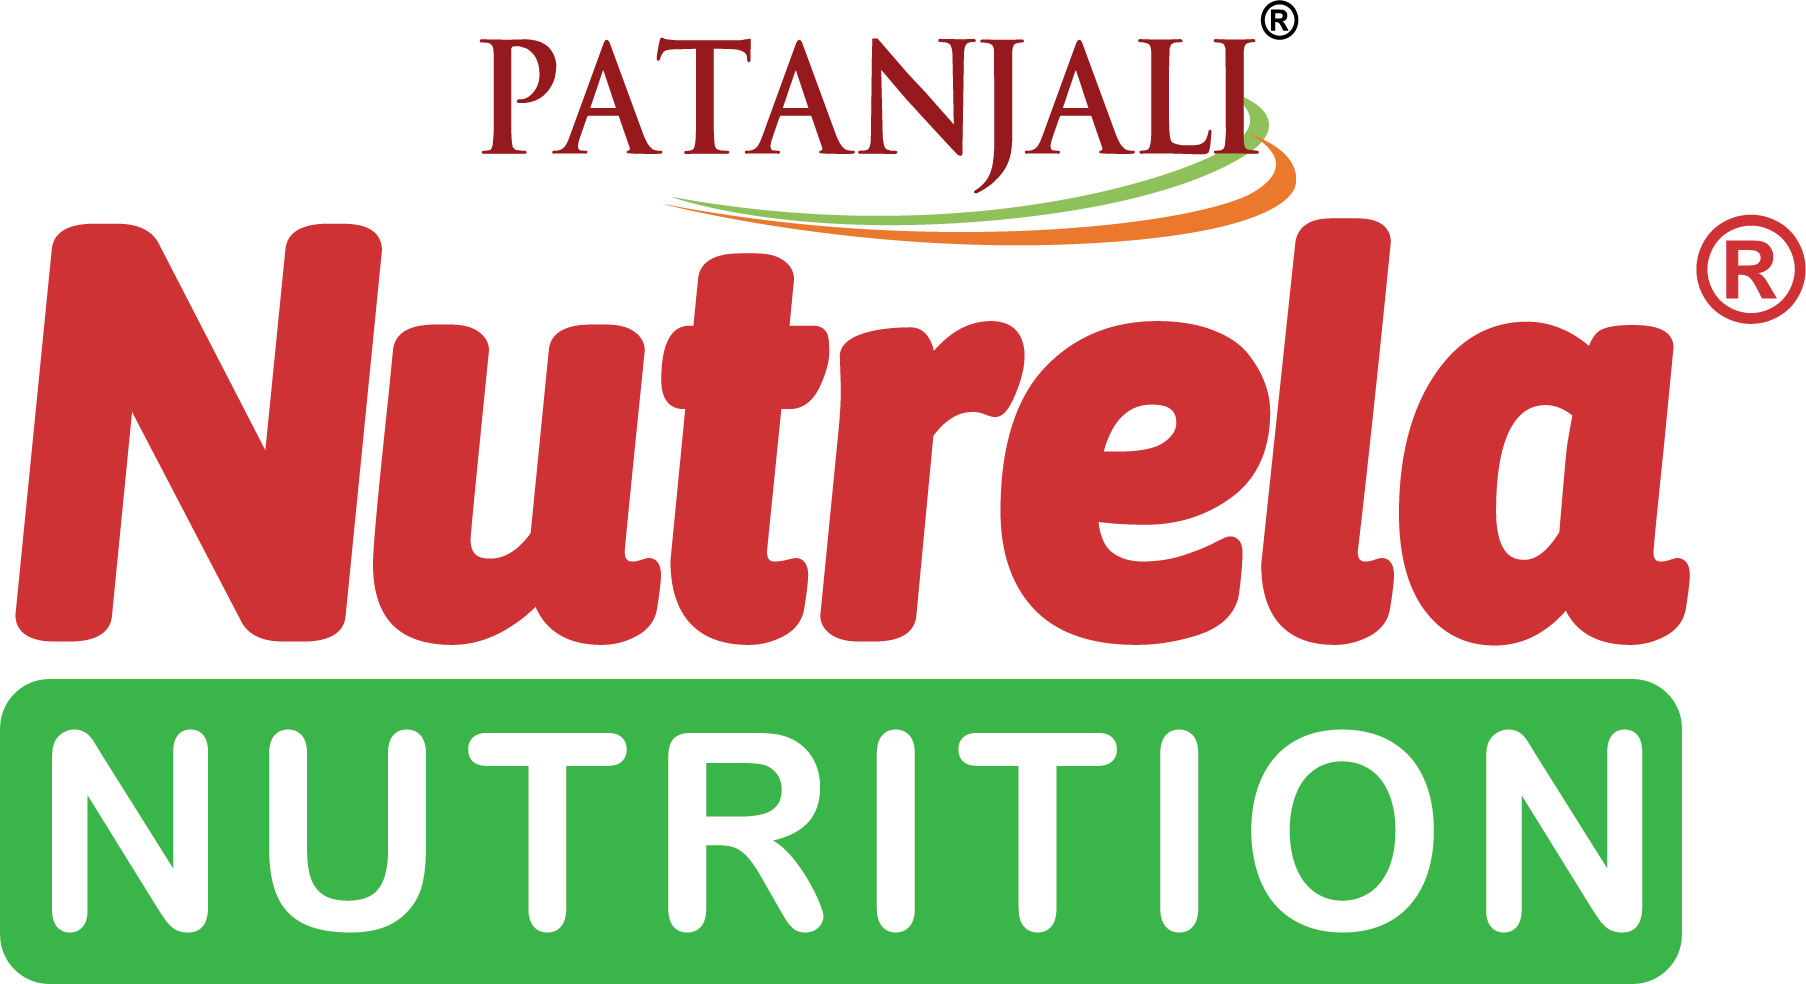 Nutrela Nutrition Coupons: Flat 10% OFF On All Orders